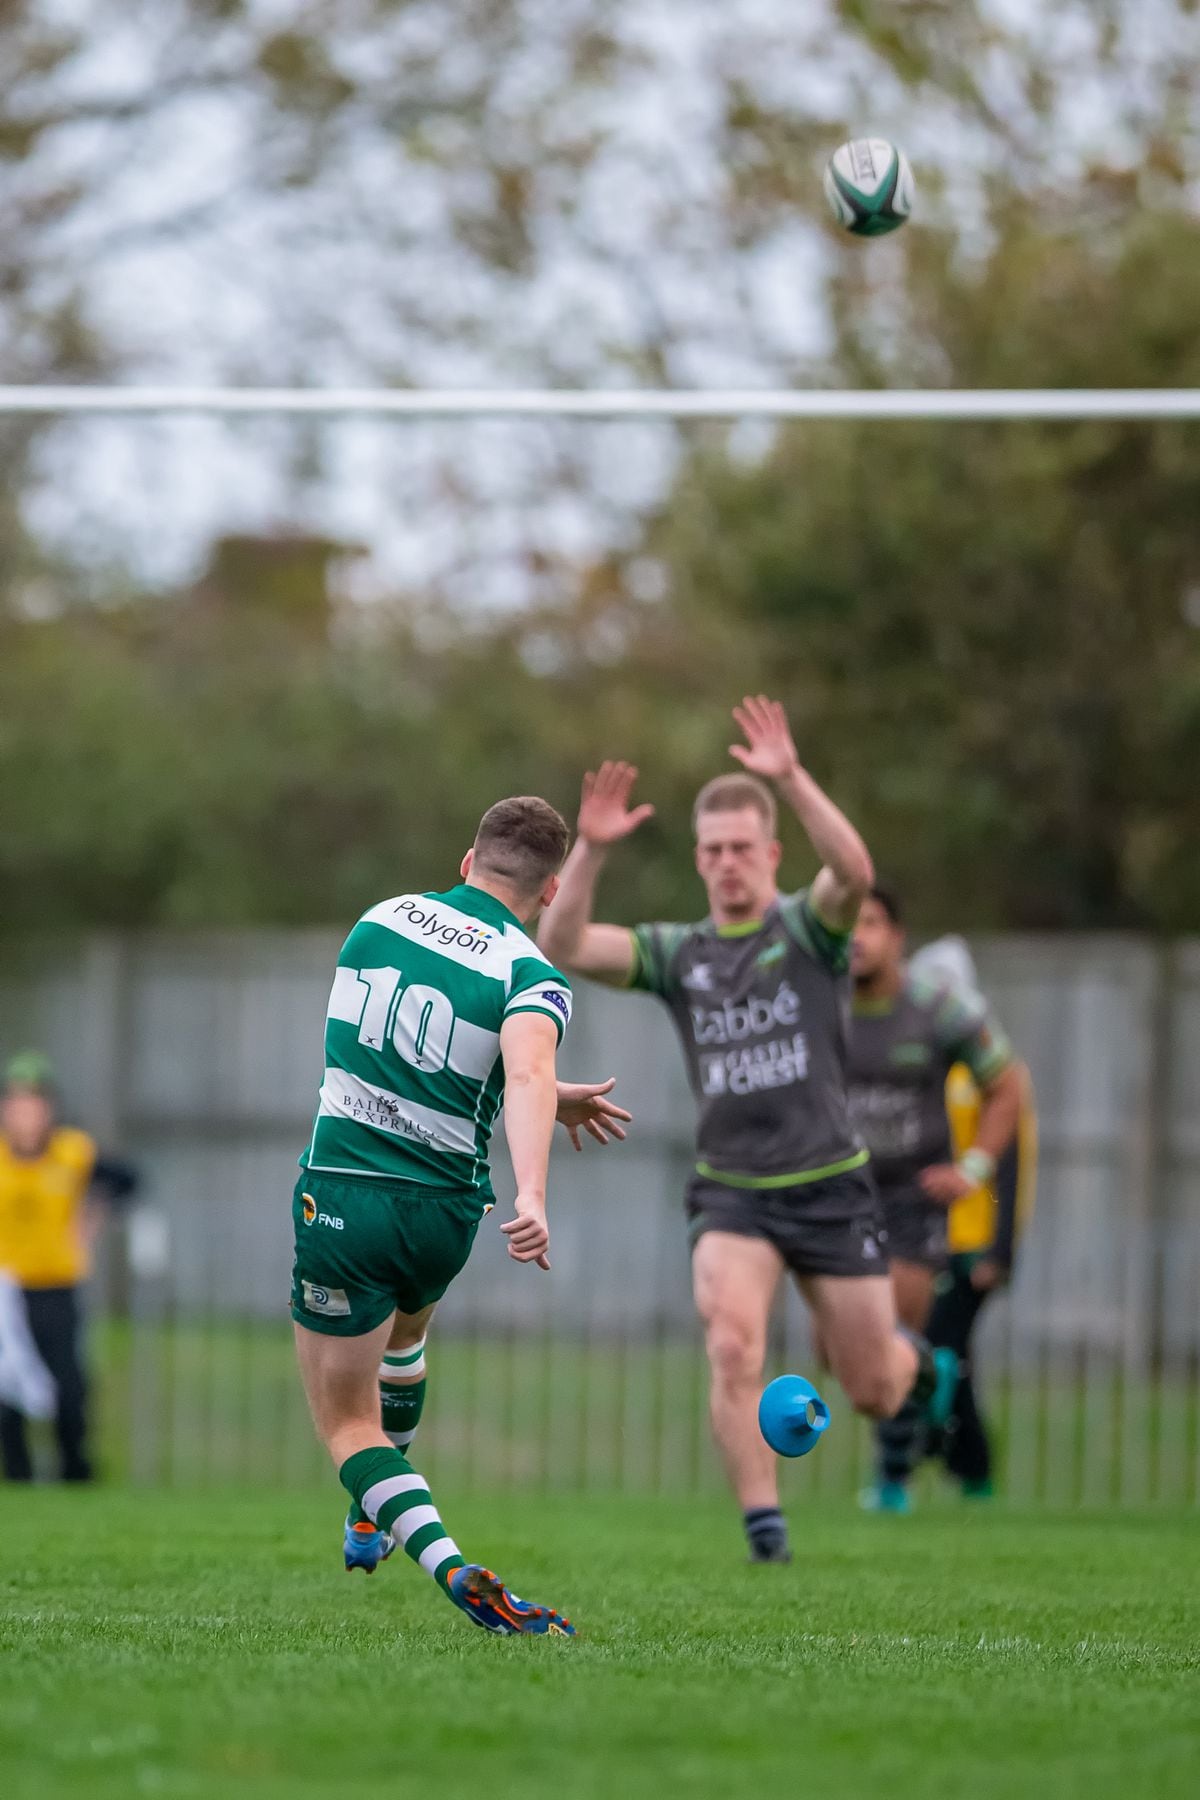 Dan Rice filling the green-and-white No. 10 shirt during last season inter-club 'test series'. He will be starting fly-half for Raiders in National Two South for the first time tomorrow at Footes Lane. (Picture by Martin Gray, 30087611)